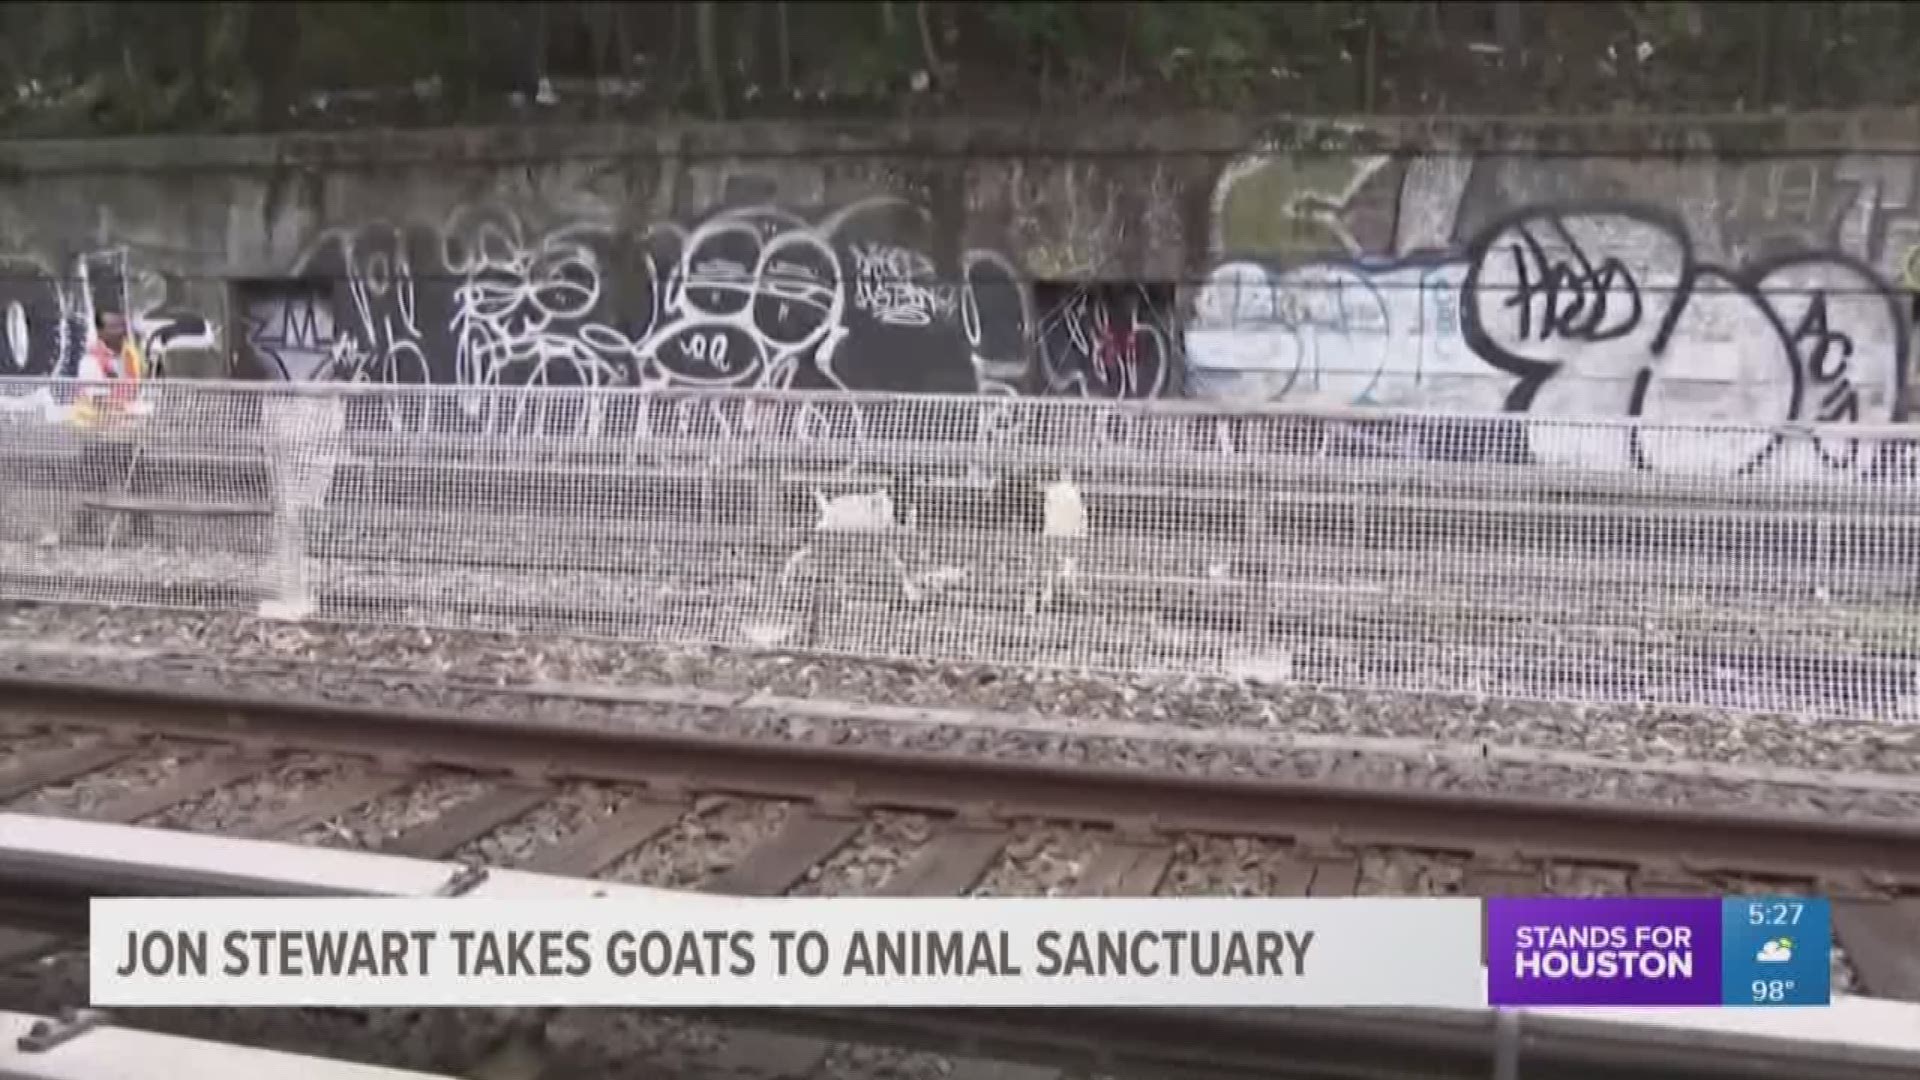 Former "Daily Show" host Jon Stewart has come to the rescue of two goats that caused havoc on the New York subway system Monday.
Several trains had to be rerouted in Brooklyn after the goats were spotted wondering along the subway tracks. 